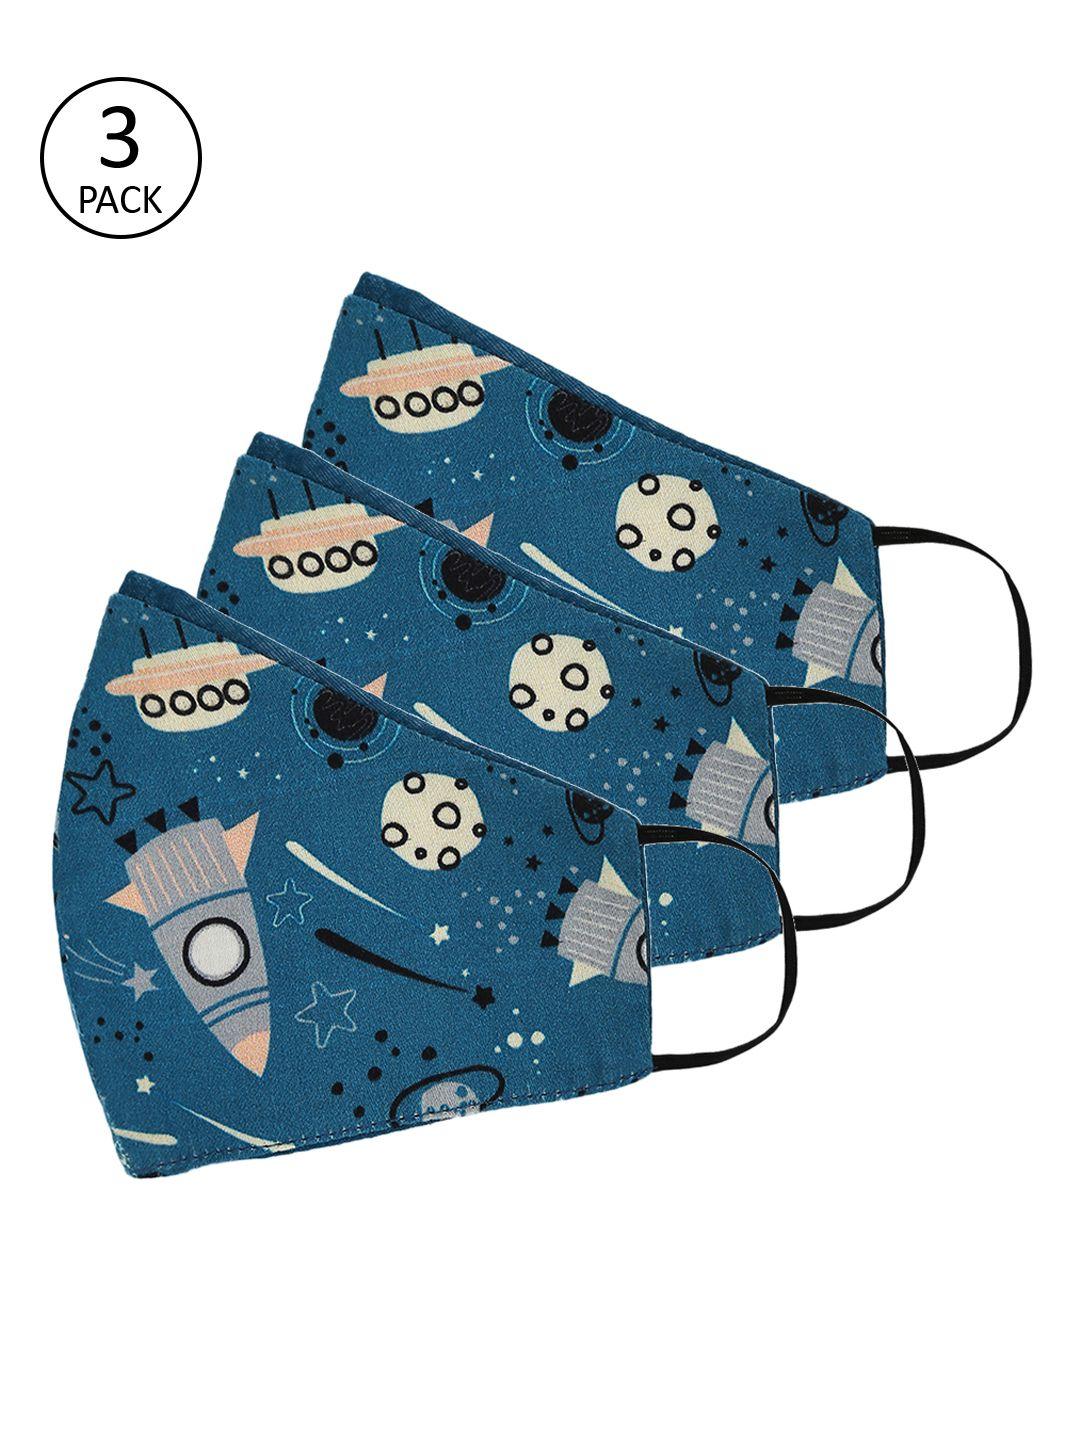 tossido unisex pack of 3 blue 3 ply premium cotton printed masks